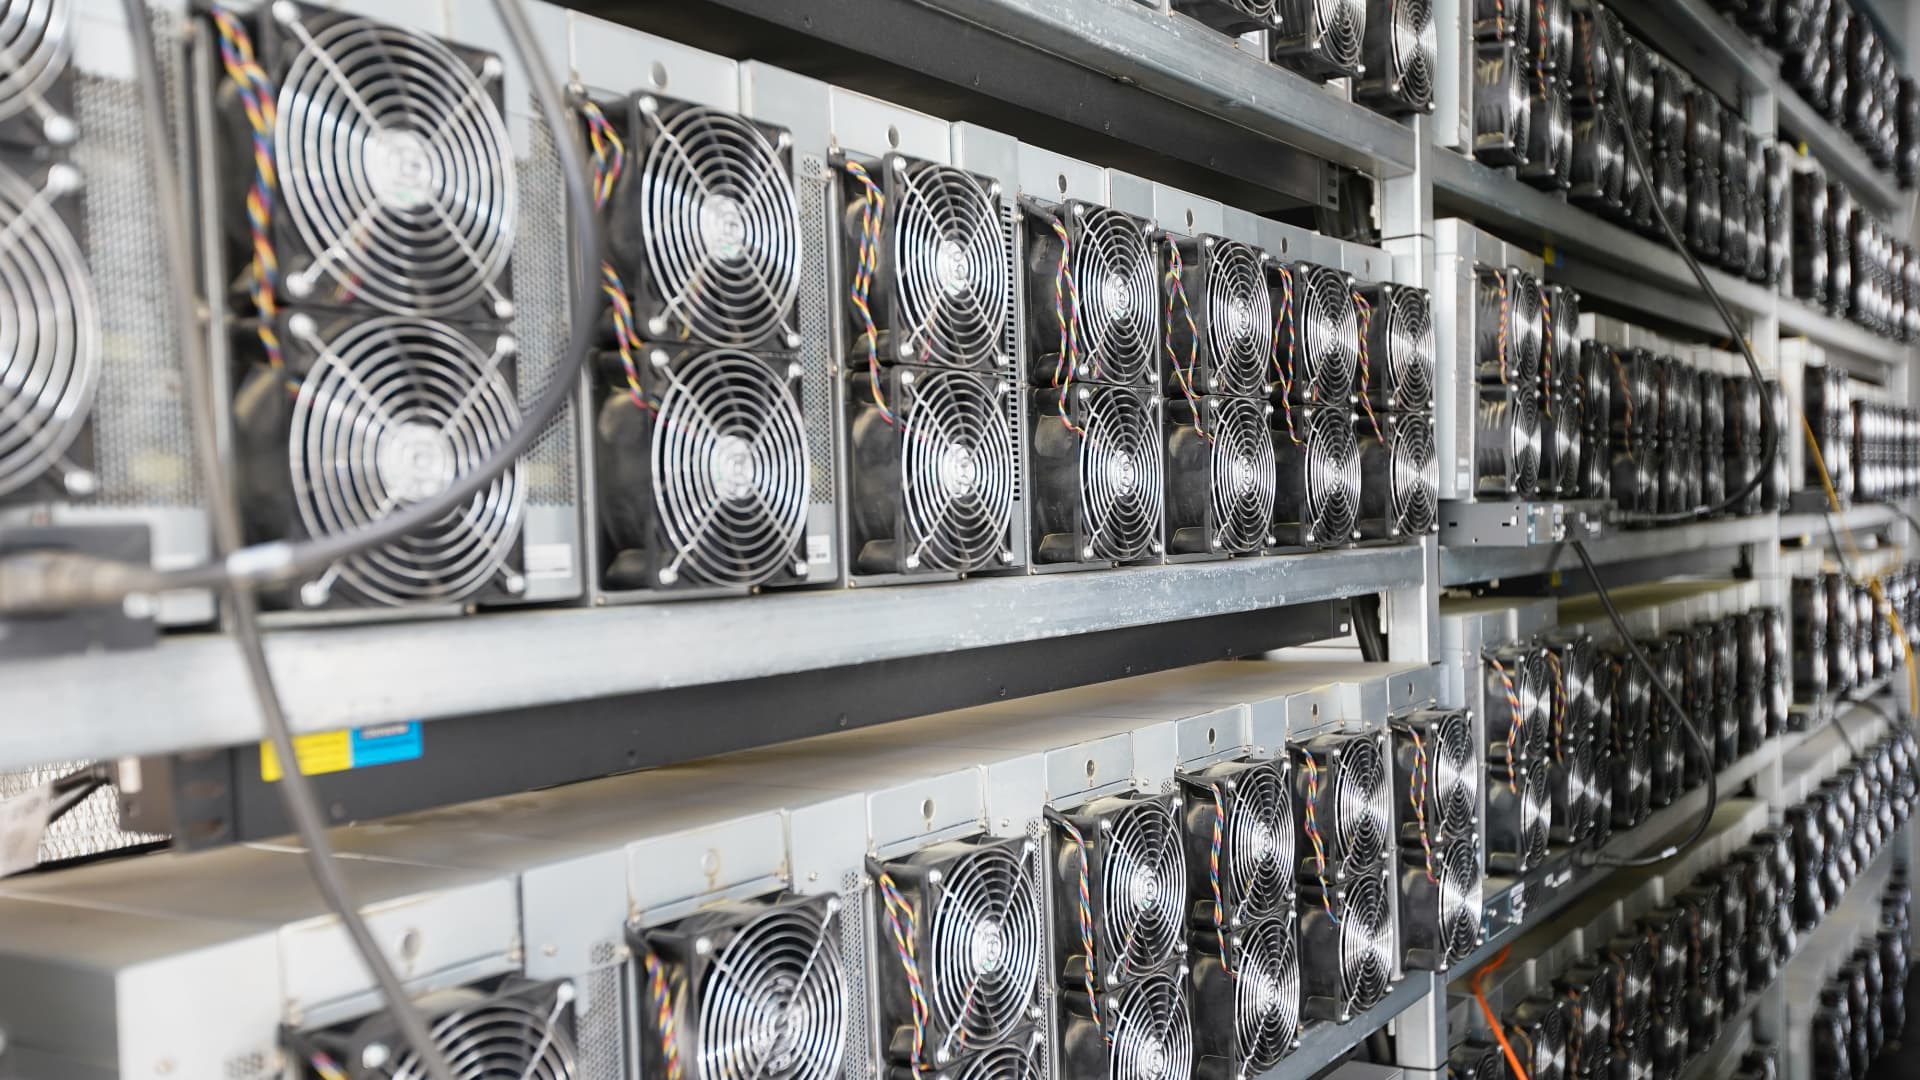 Bitcoin miner Core Scientific warns it might go bankrupt, stock plunges